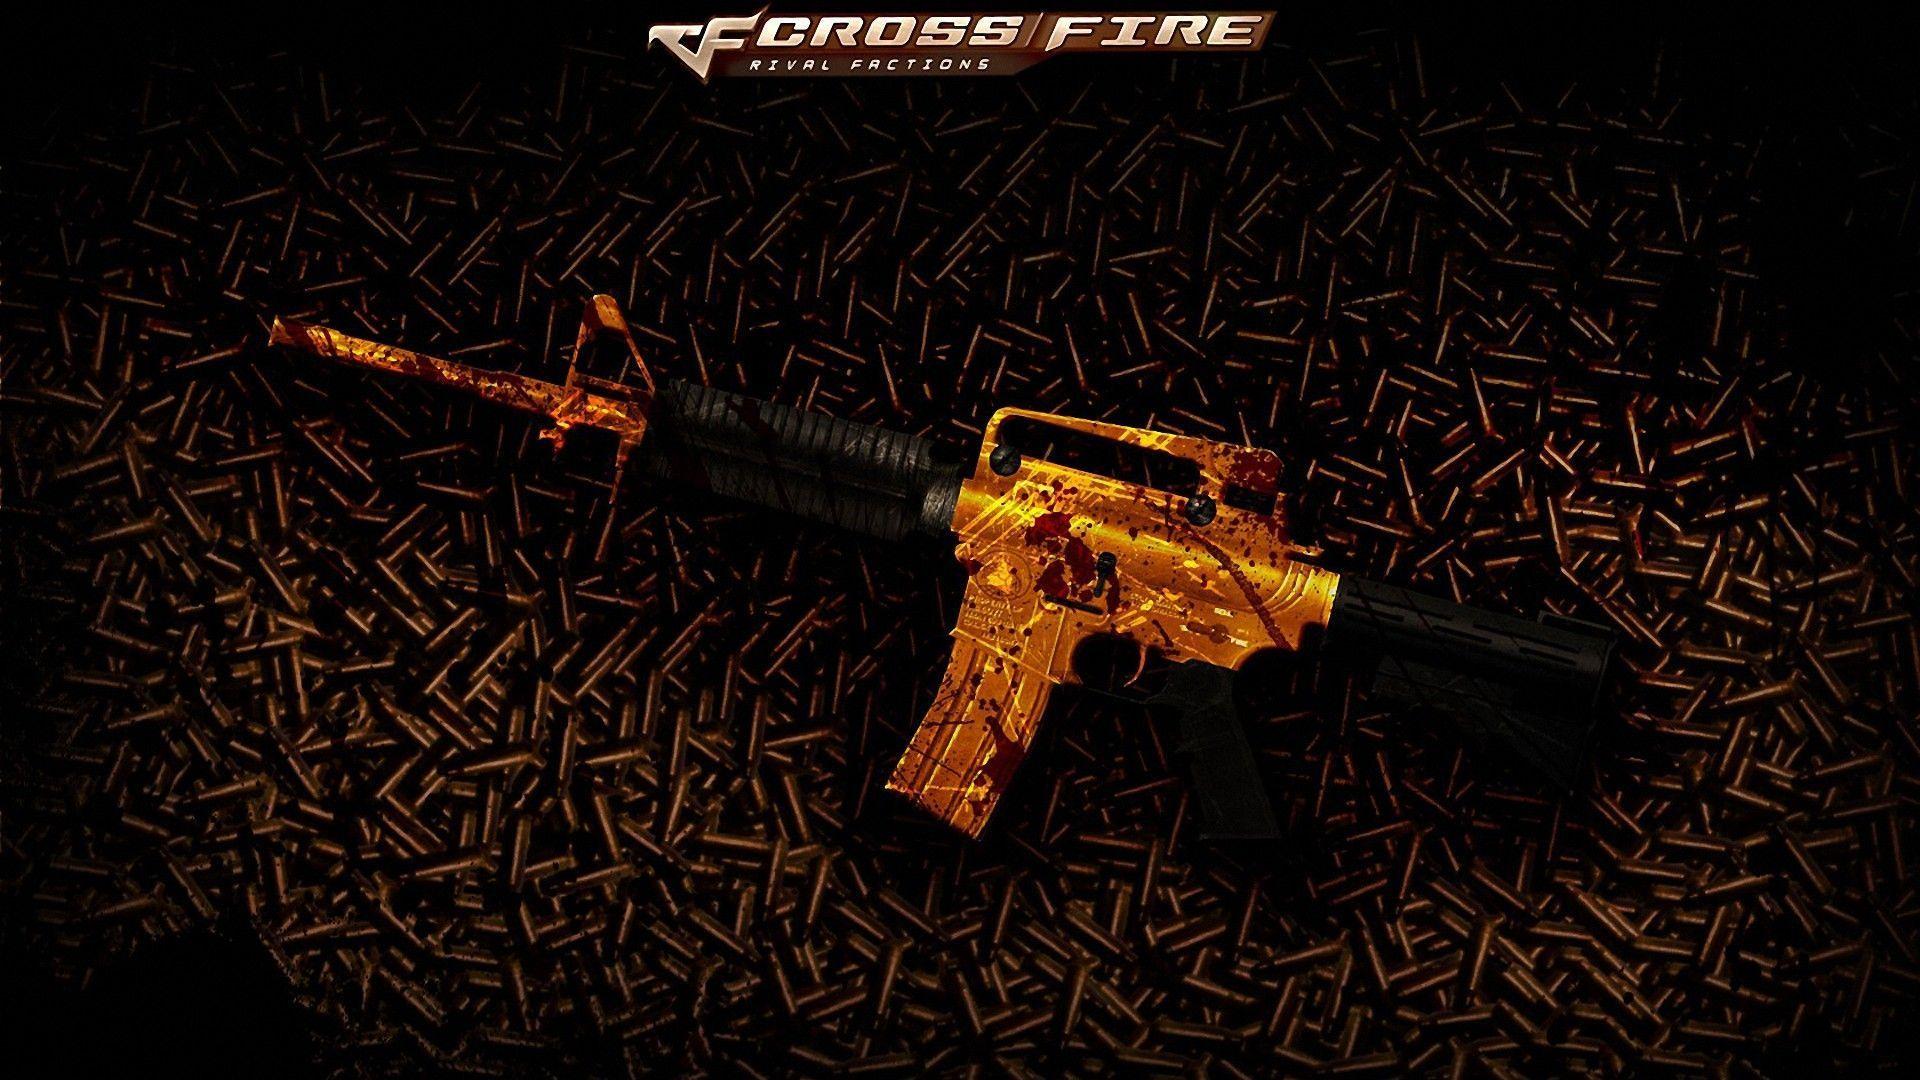 Crossfire Wallpaper and Photo, 1920x1080